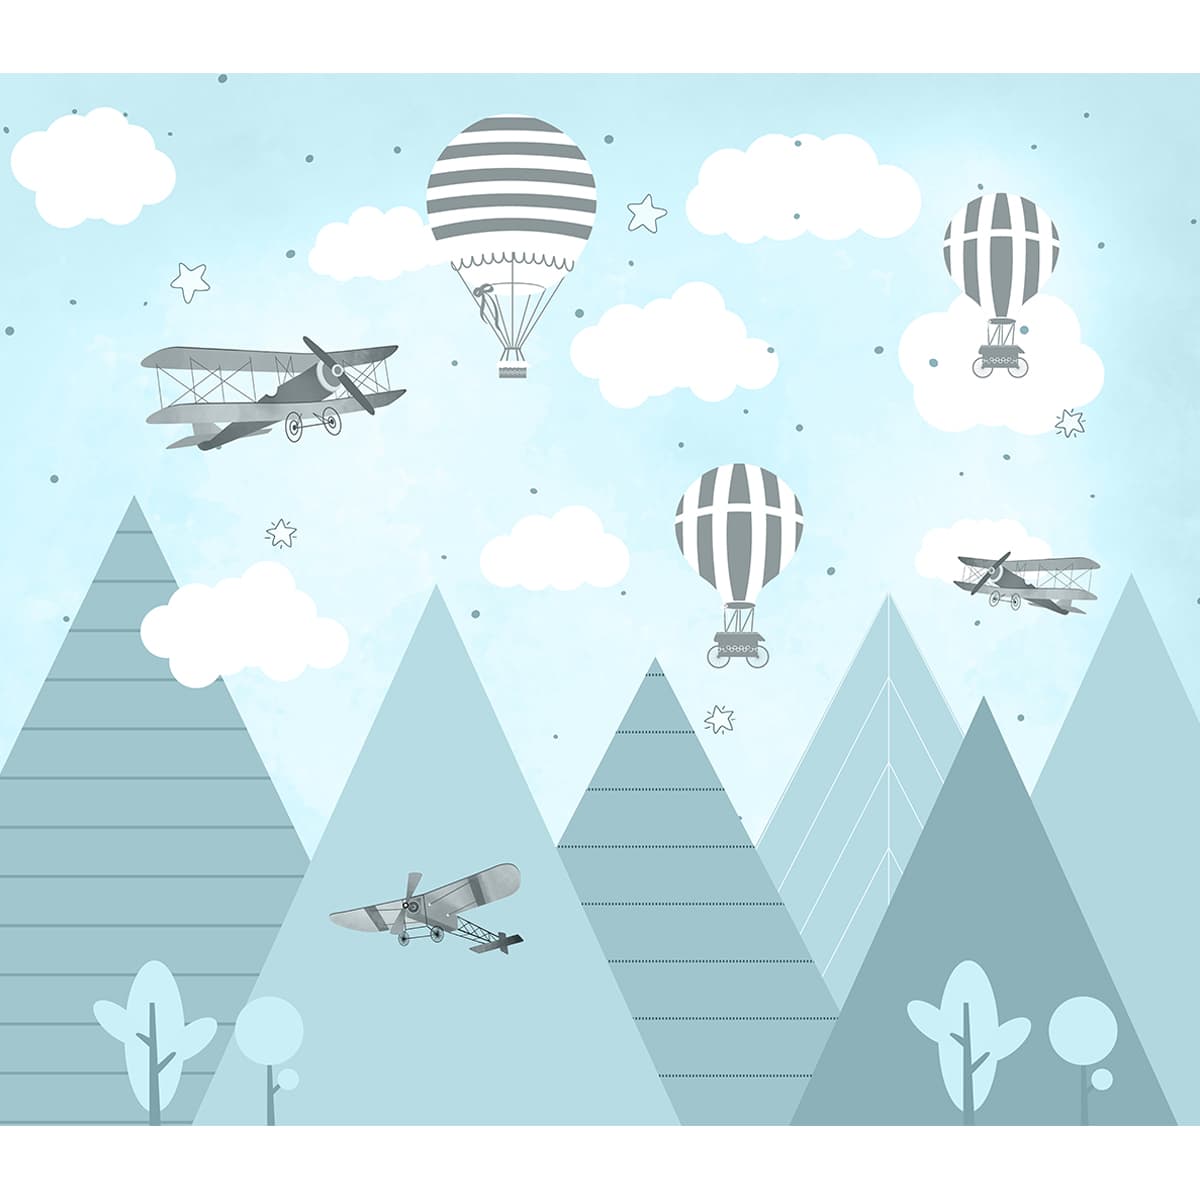 Gliders And Hot Air Balloons Wallpaper